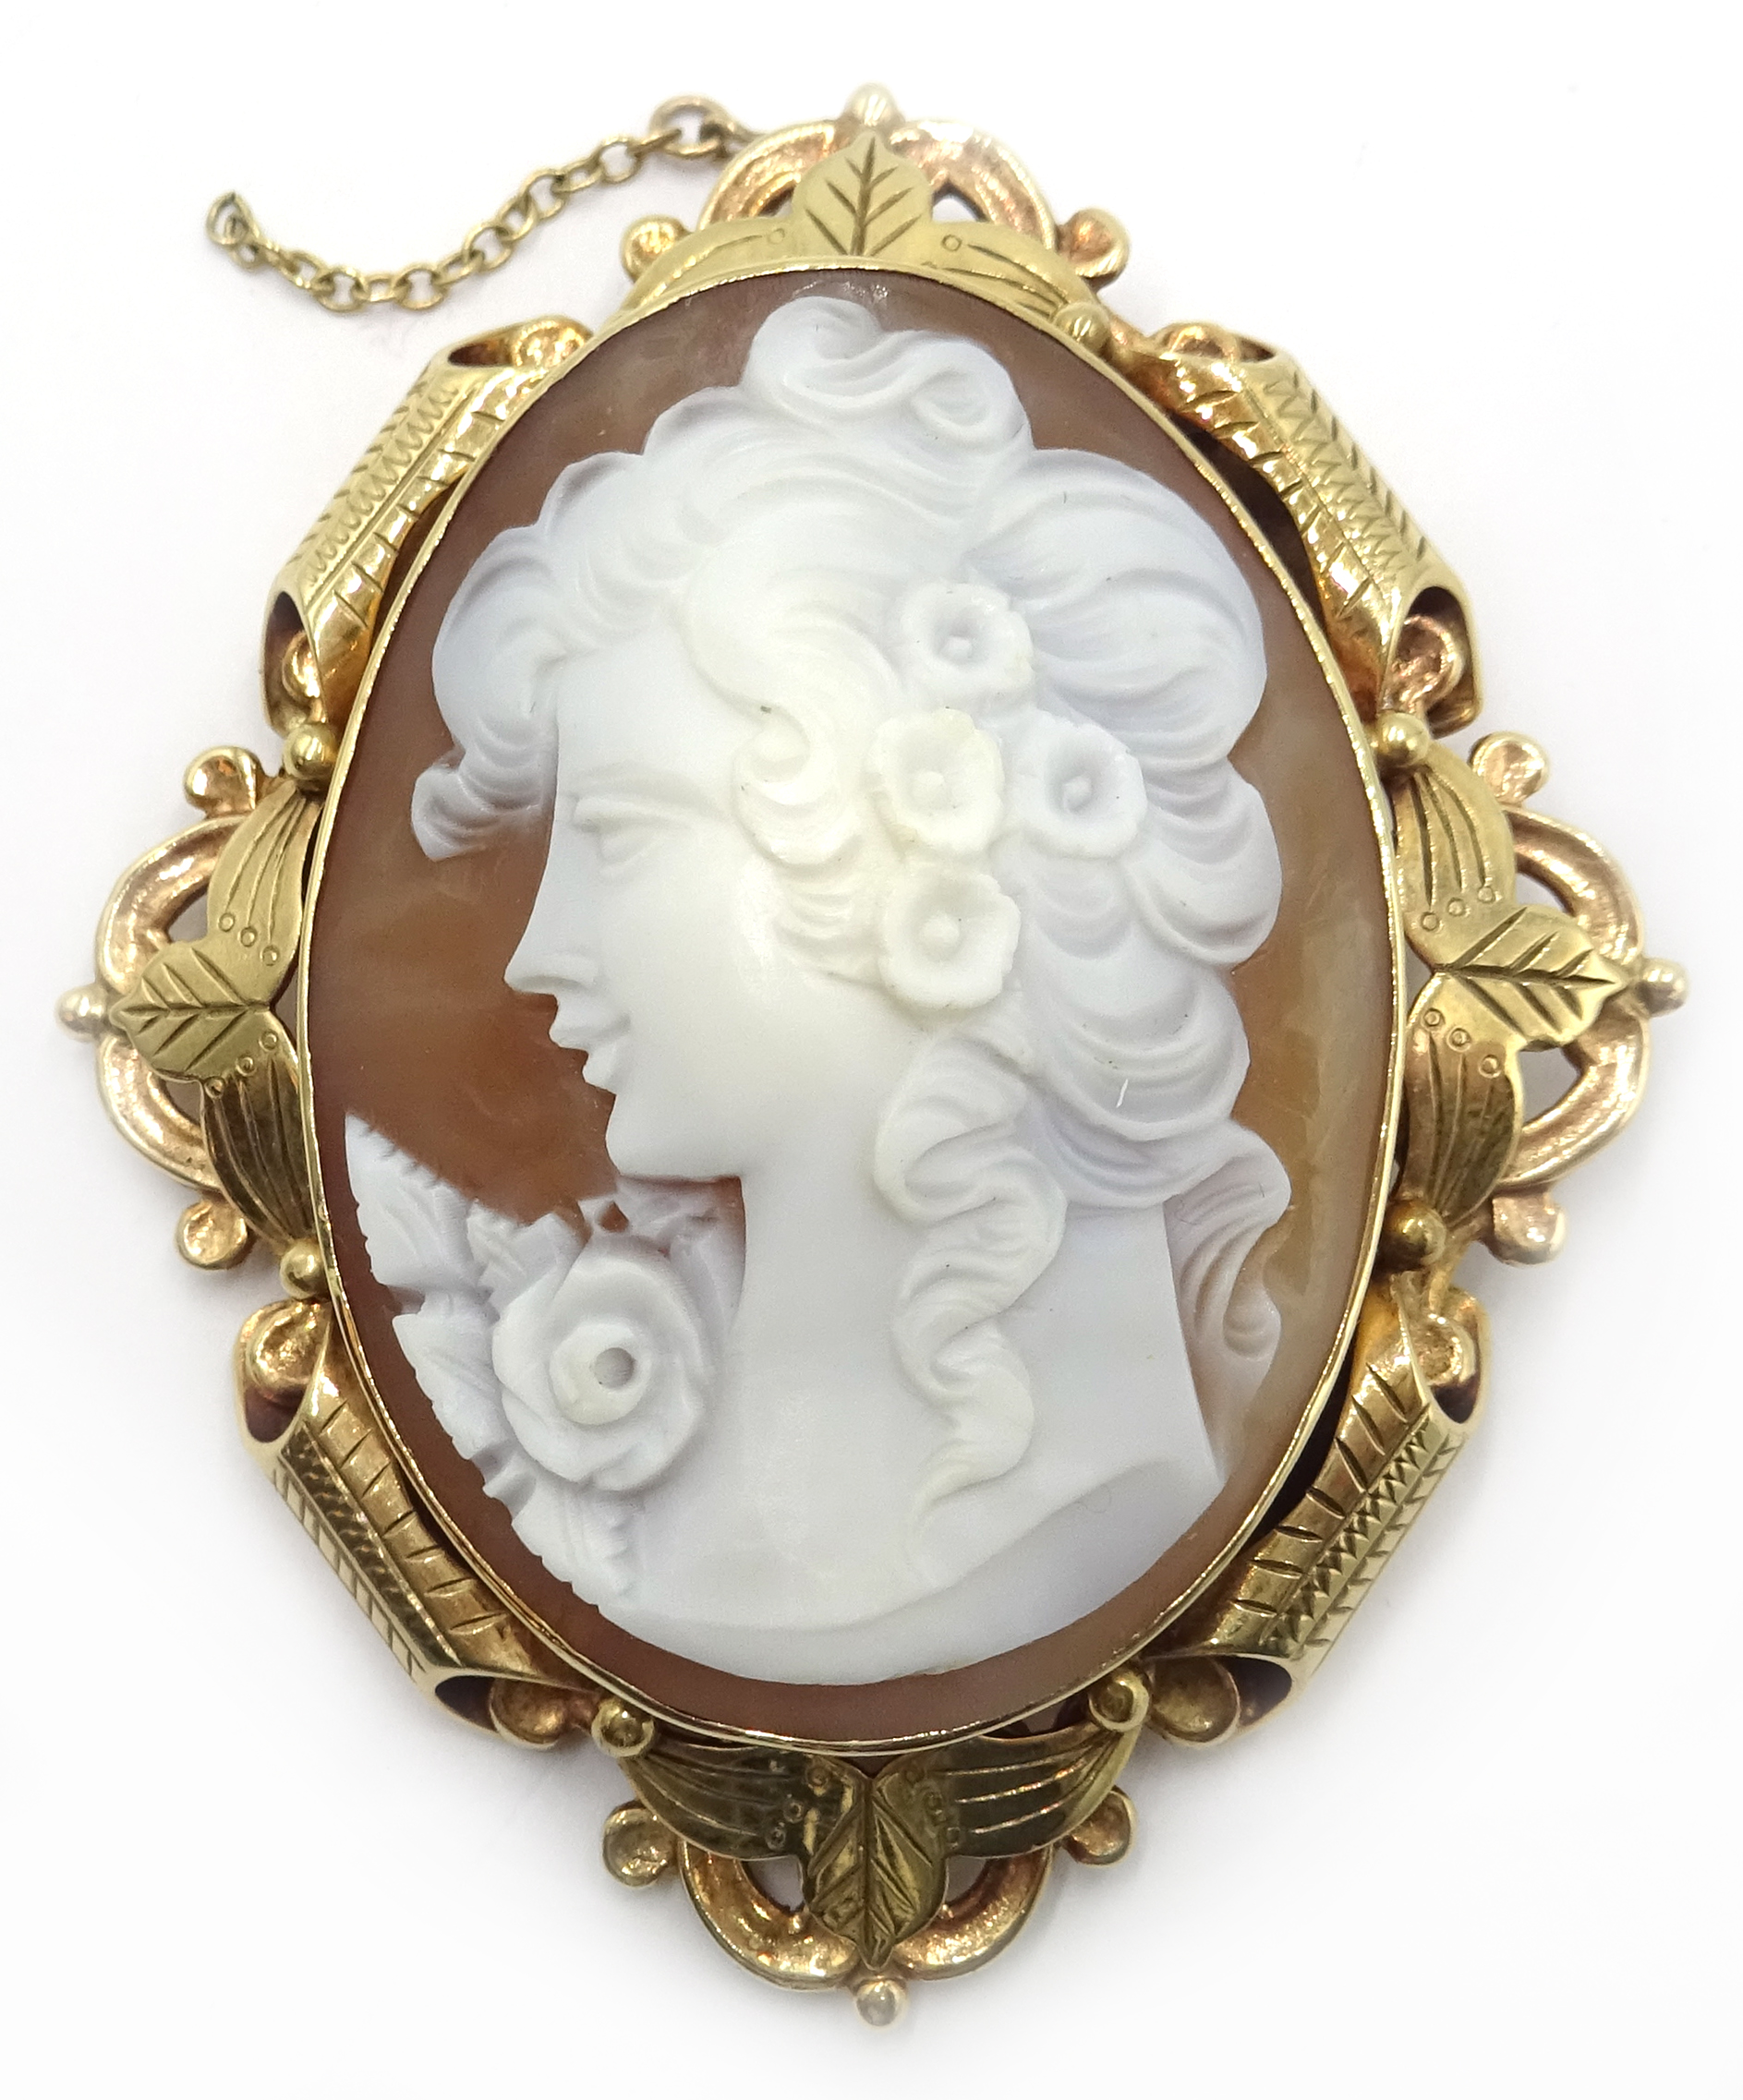 9ct gold cameo brooch with scroll and leaf design,